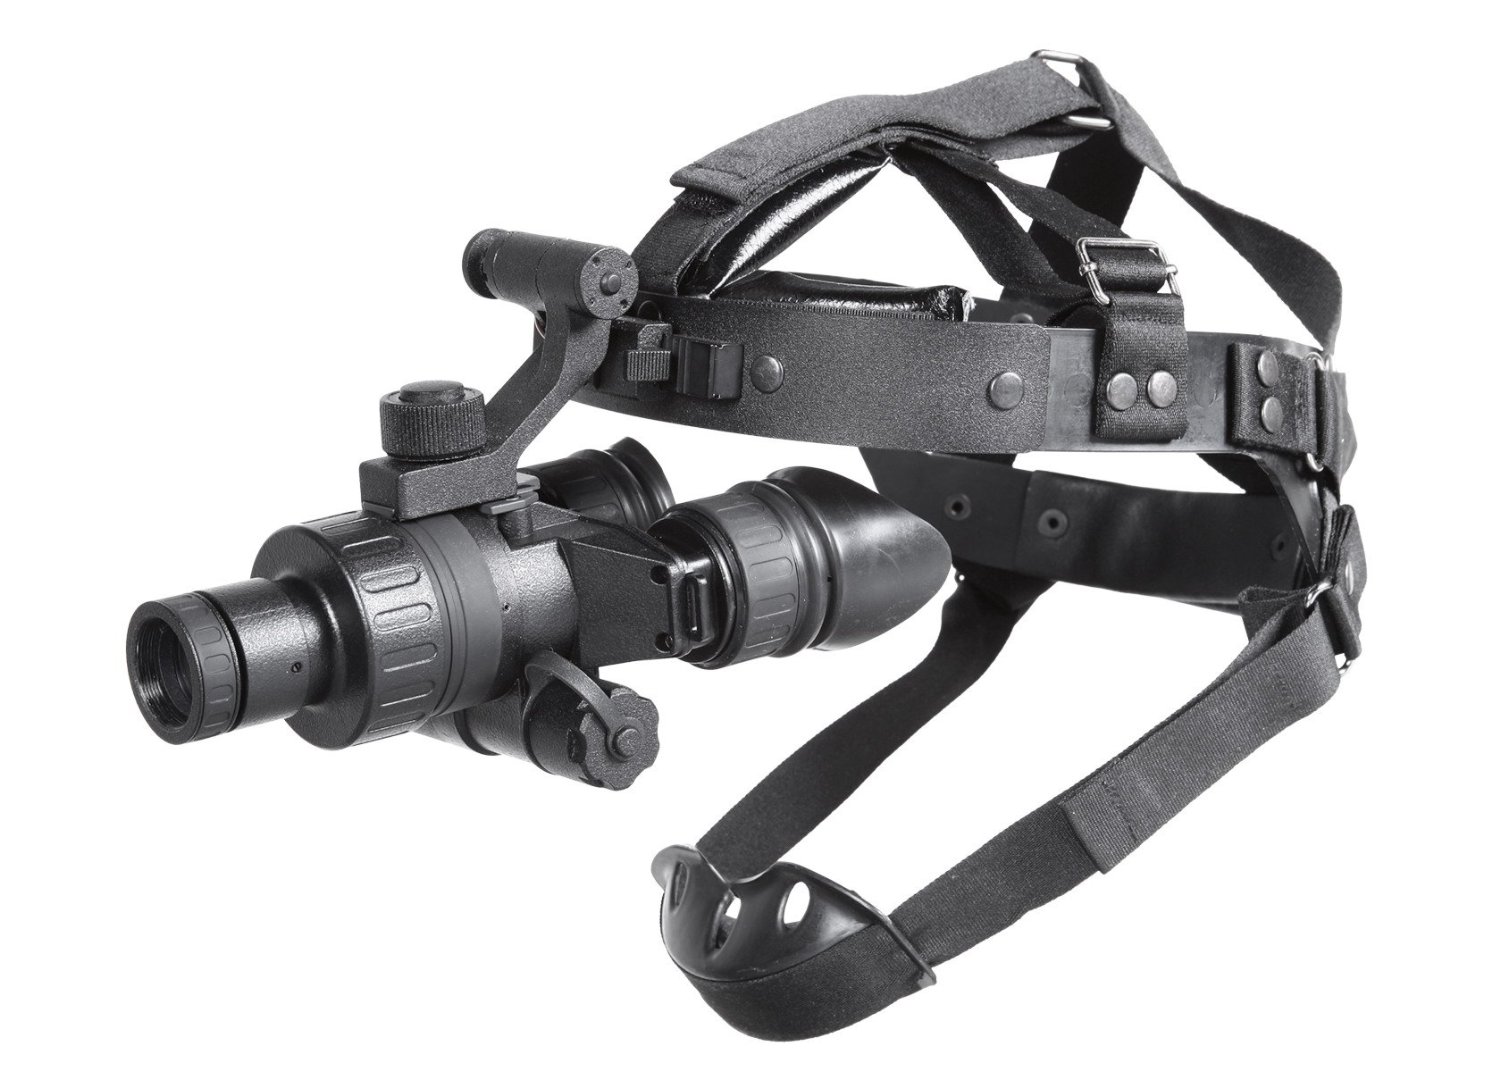 Armasight Nyx7-ID Gen 2+ Night Vision Goggles Review